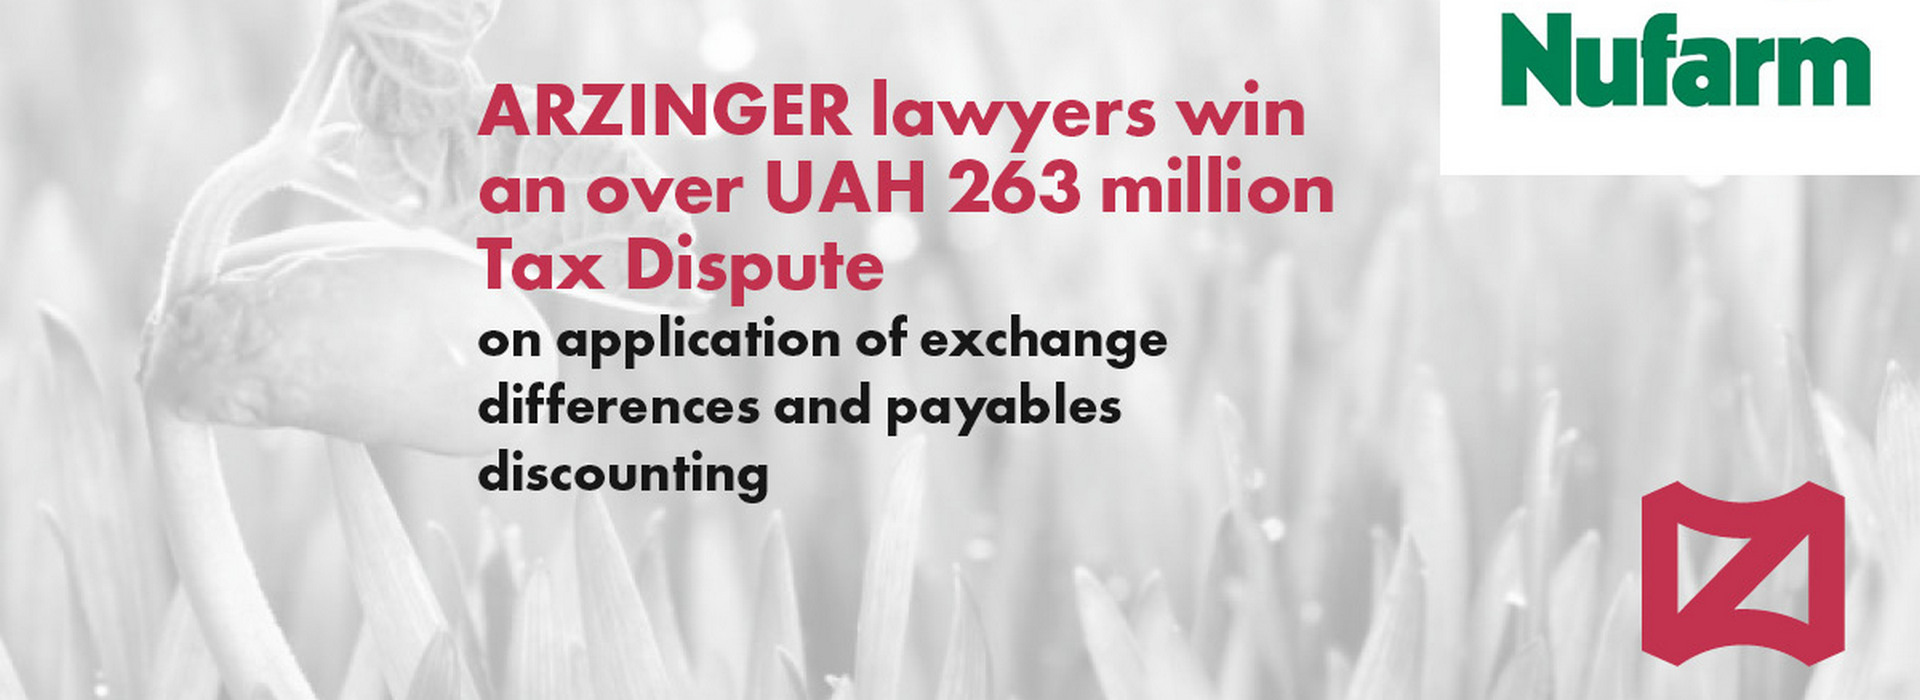 Arzinger Lawyers Win an Over UAH 263 Million Tax Dispute on Application of Exchange Differences and Payables Discounting